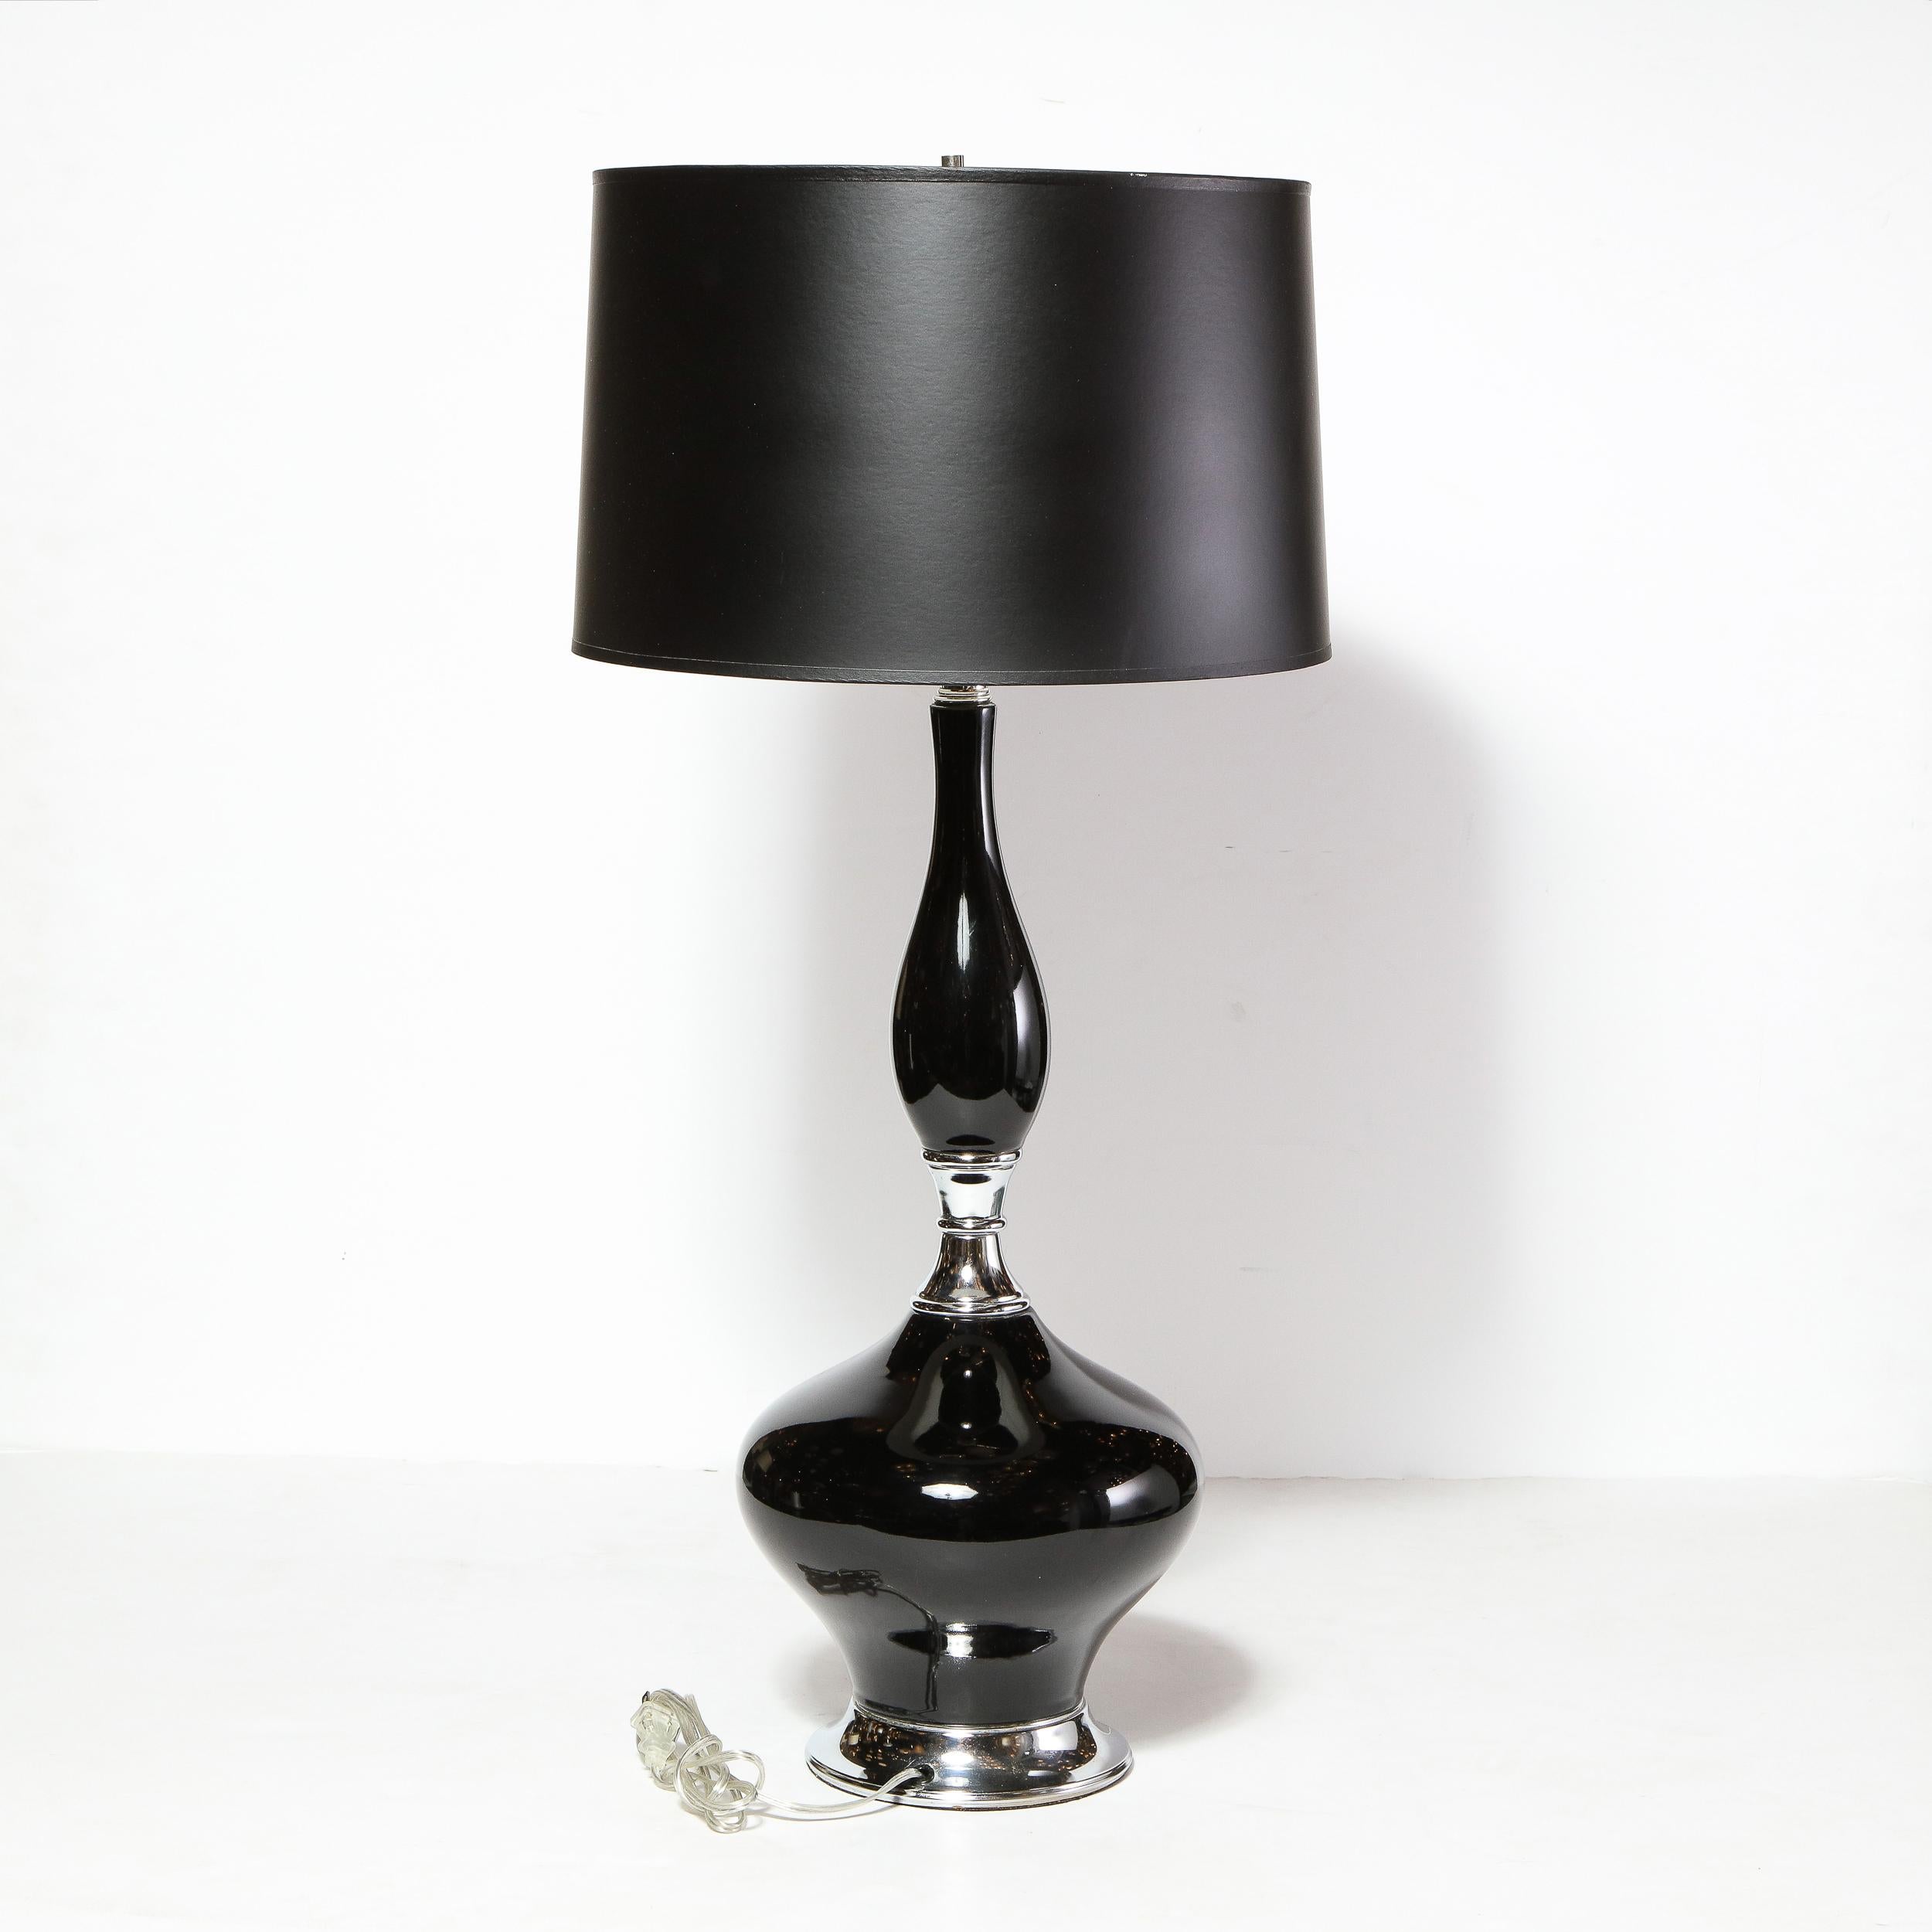 Pair of Mid-Century Modern Sculptural Black Glazed Ceramic Lamps w/ Chrome Bases For Sale 1